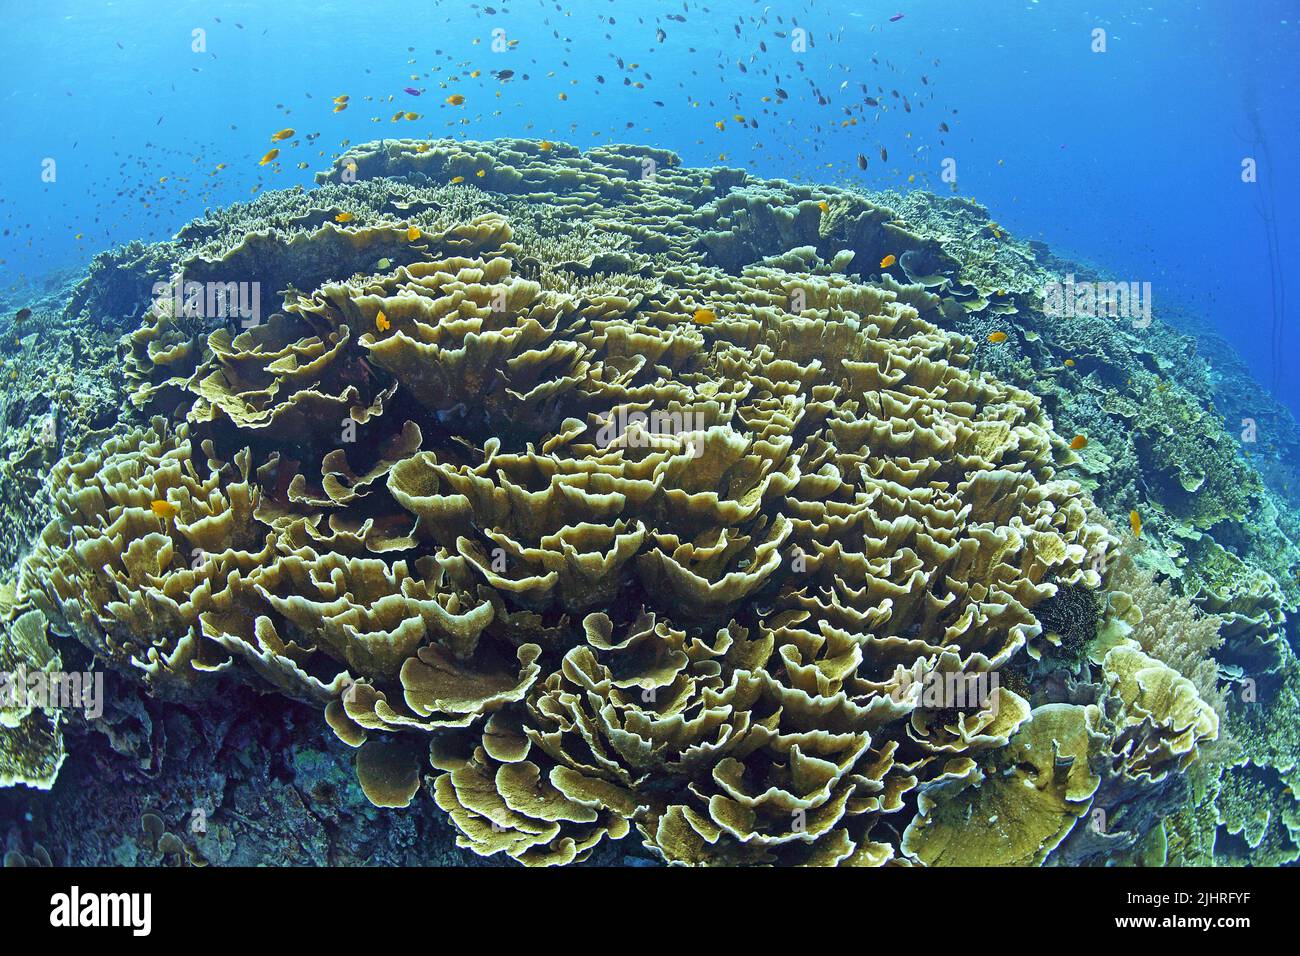 Coral reef with Montipora corals (Acroporidae), Great Barrier Reef, Australia Stock Photo